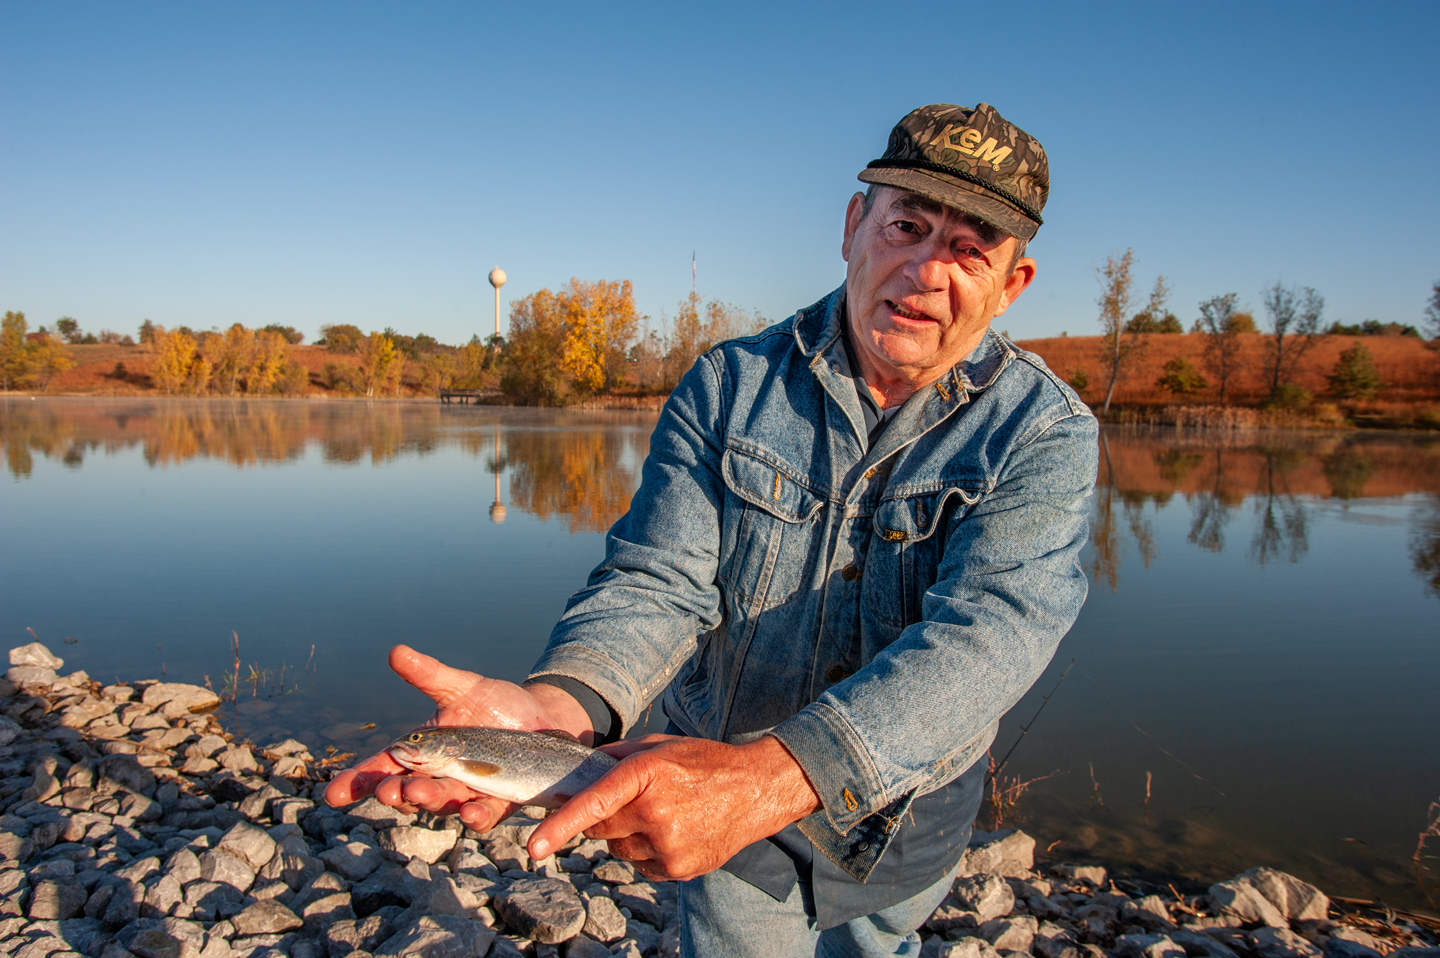 Read More: Fall is calling all anglers to wet a line